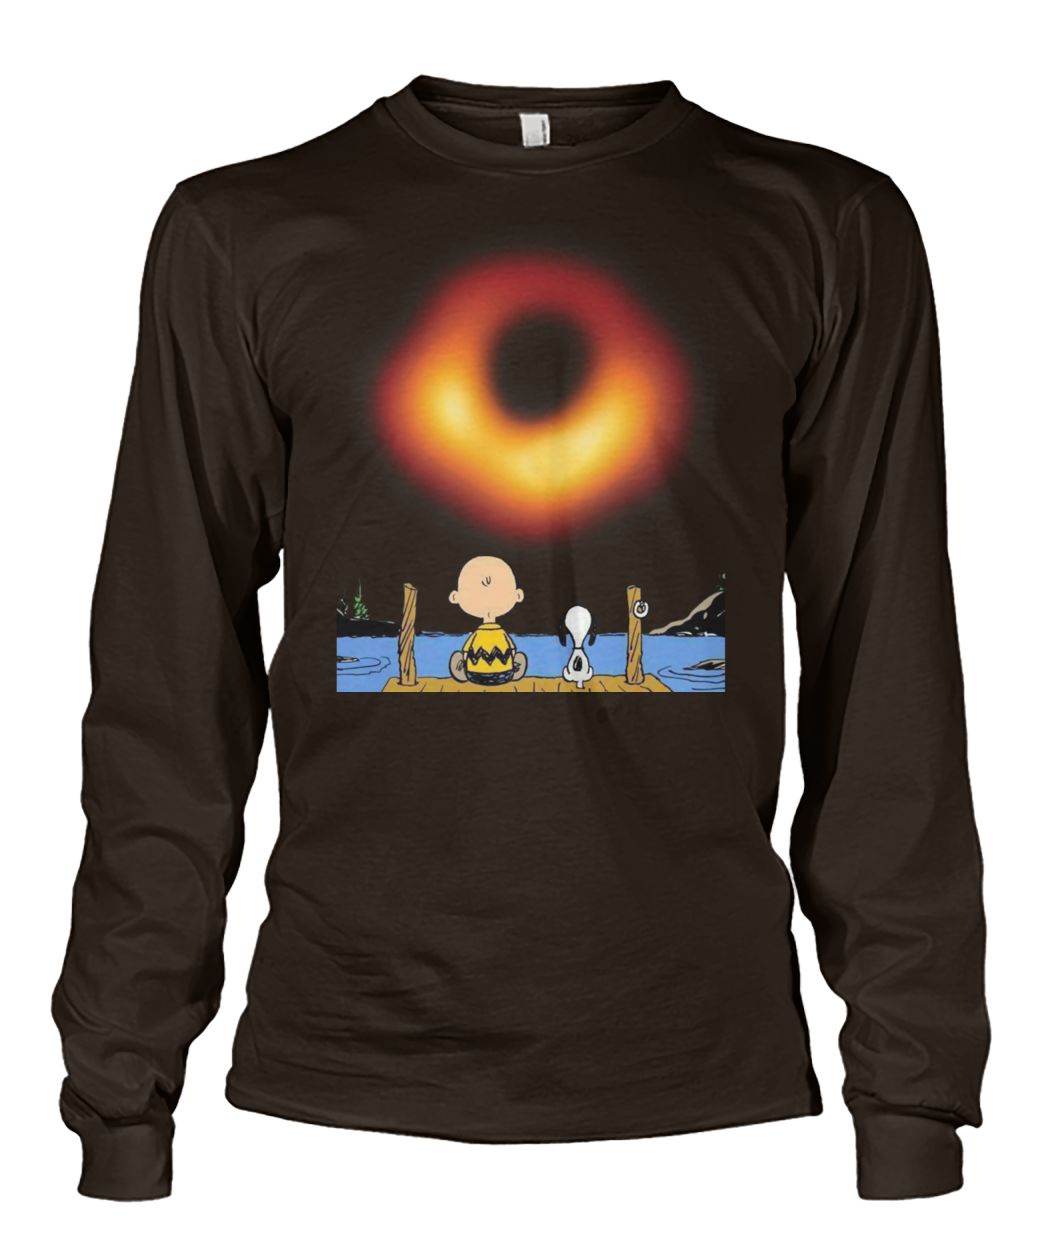 Snoopy and charlie brown black hole photo 2019 unisex long sleeve